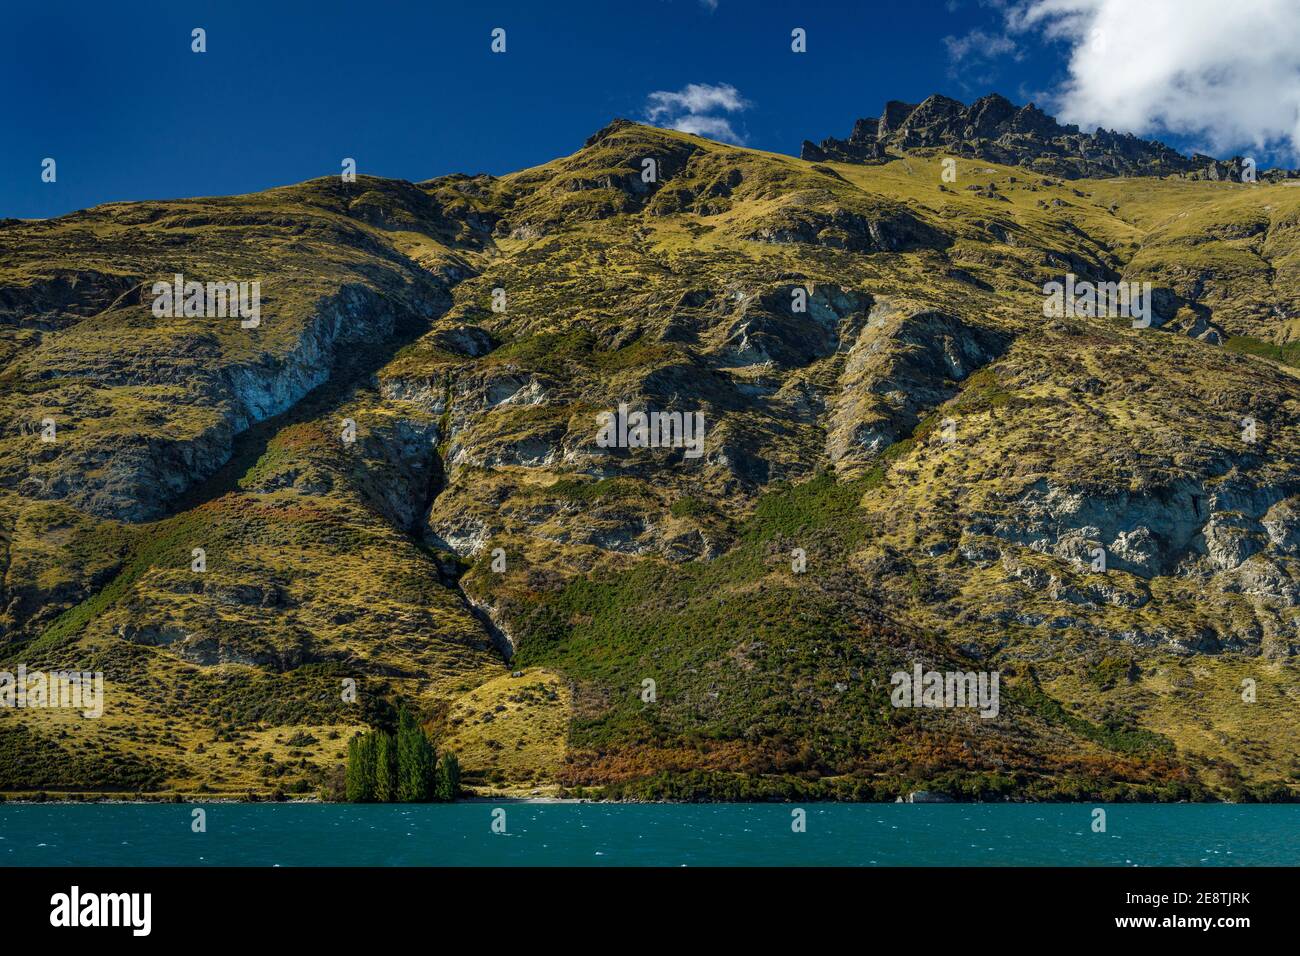 The mountains and hillsides along Lake Wakatipu in Queensland, South Island, New Zealand. Stock Photo